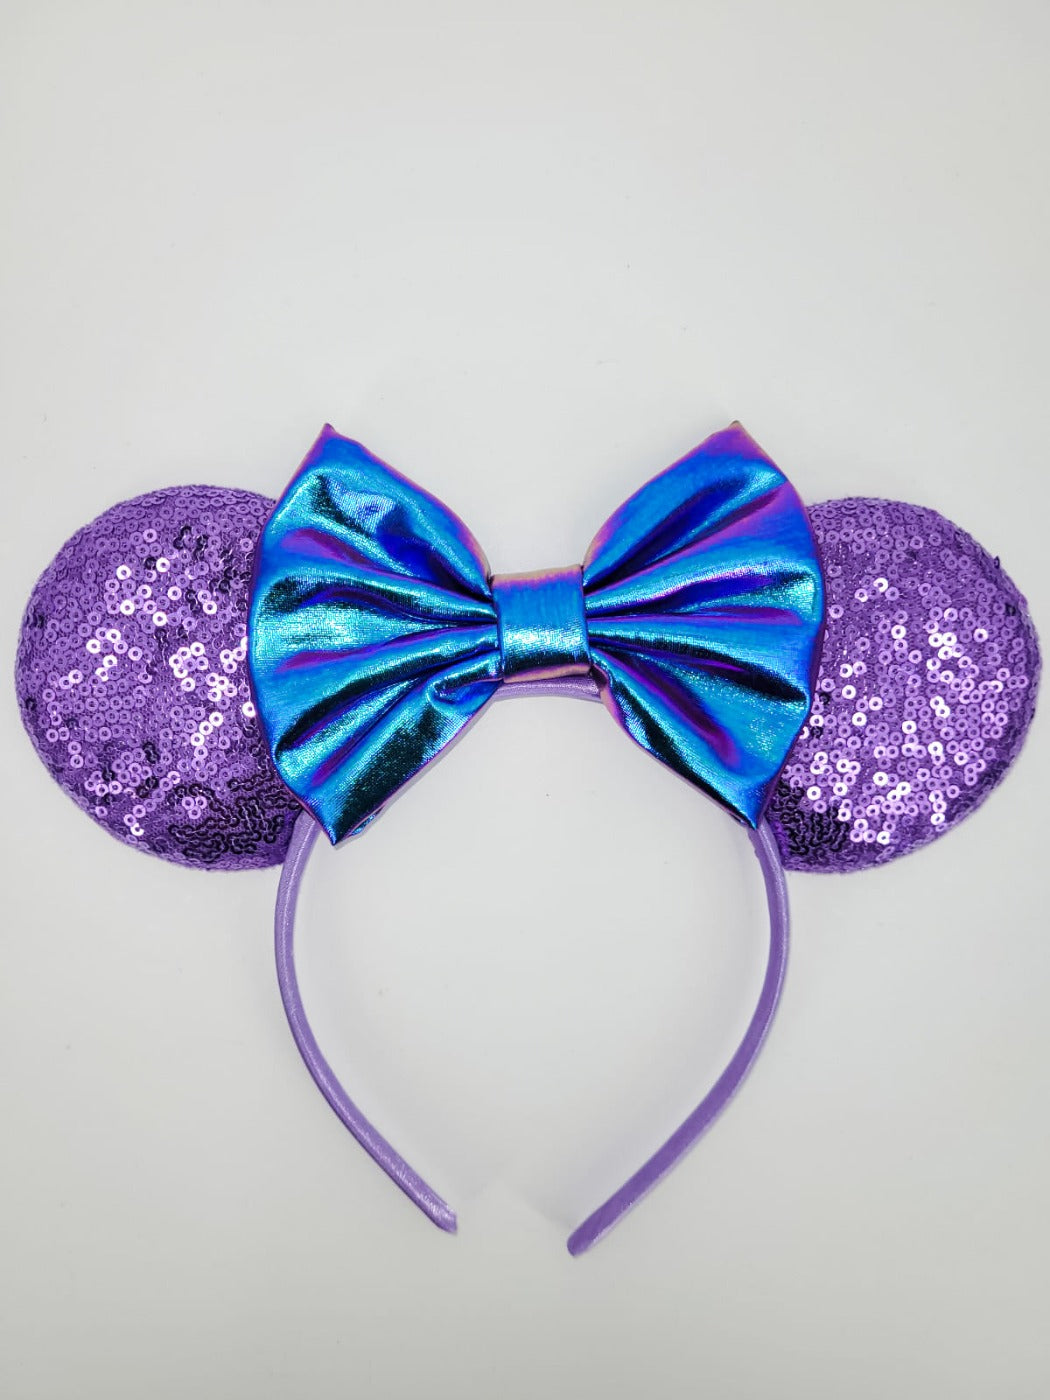 Purple Sequined Ear Headband with Blue Iridescent Bow